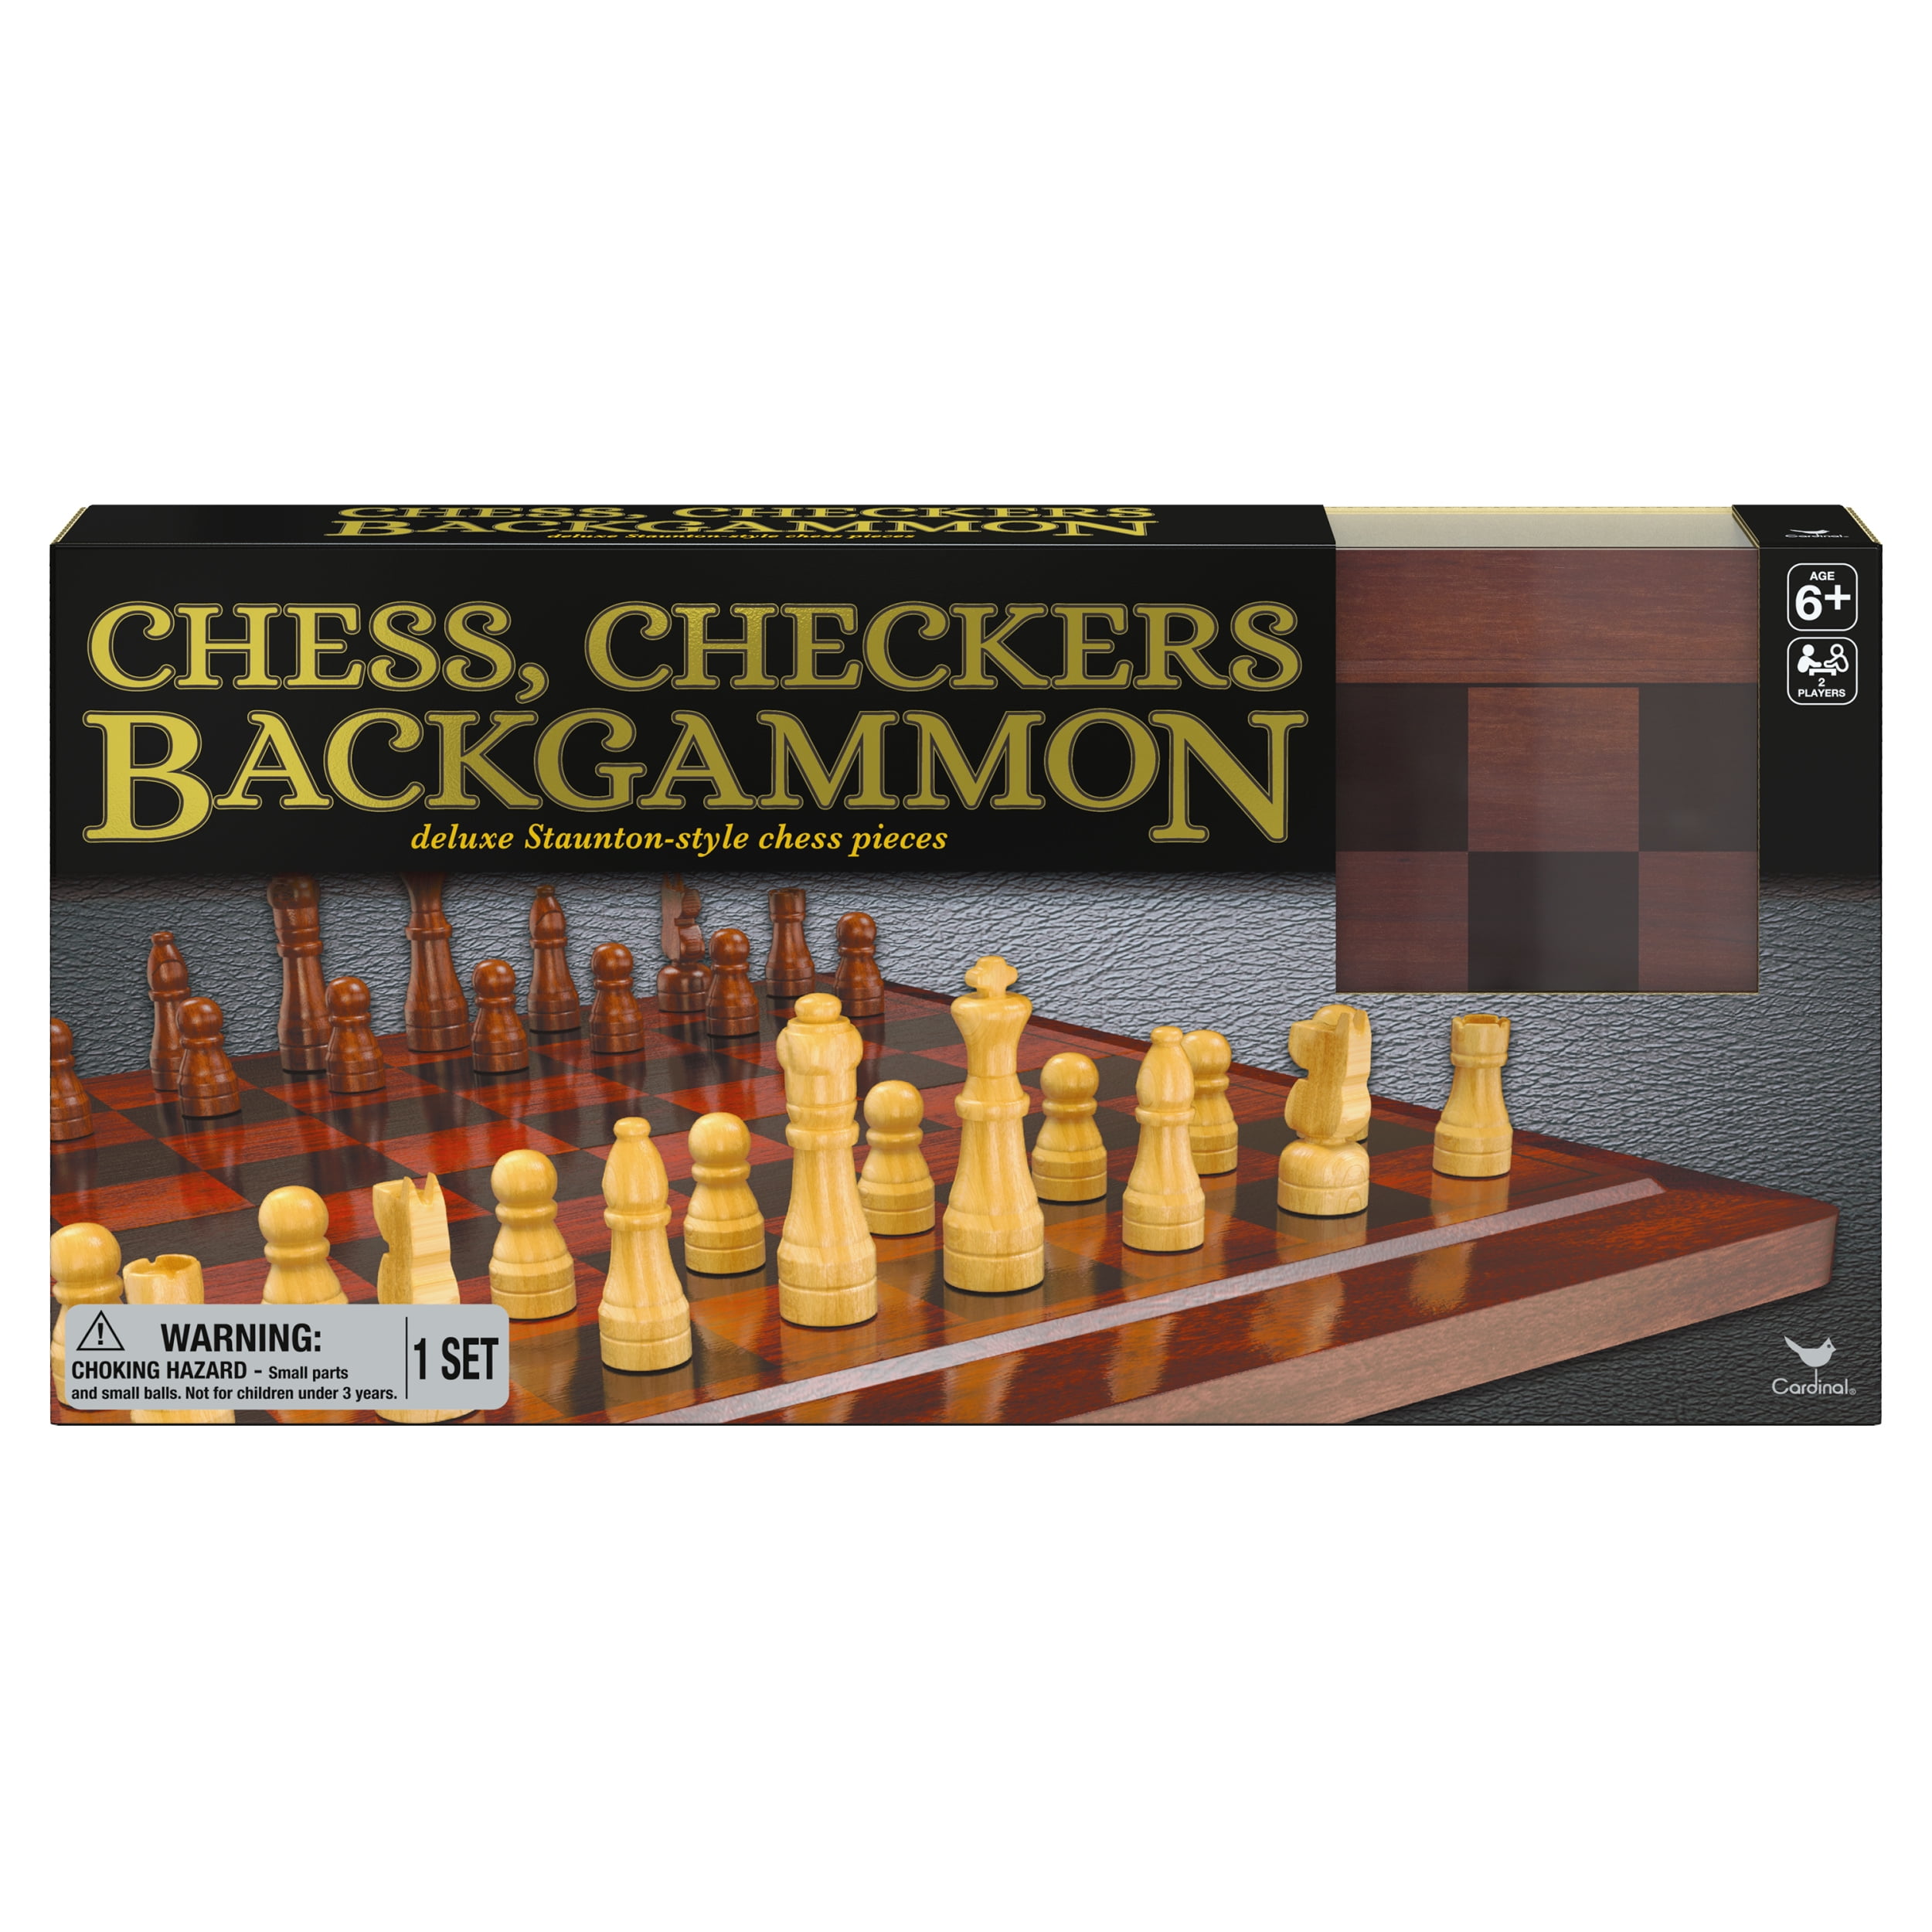 Wooden Chess, Checkers, and Backgammon Game Set - Walmart.com